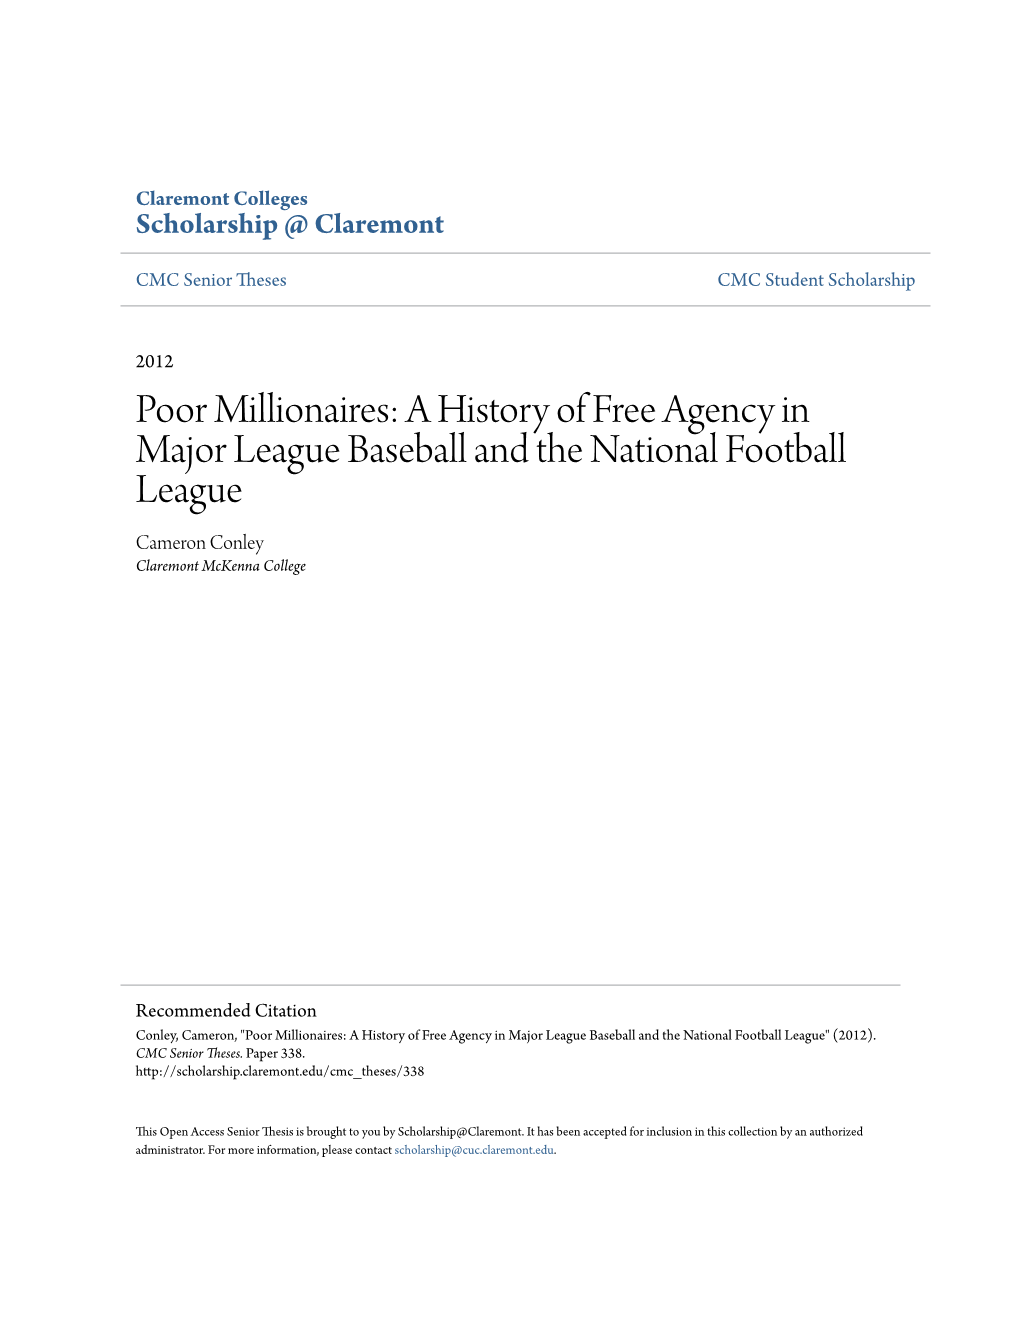 A History of Free Agency in Major League Baseball and the National Football League Cameron Conley Claremont Mckenna College